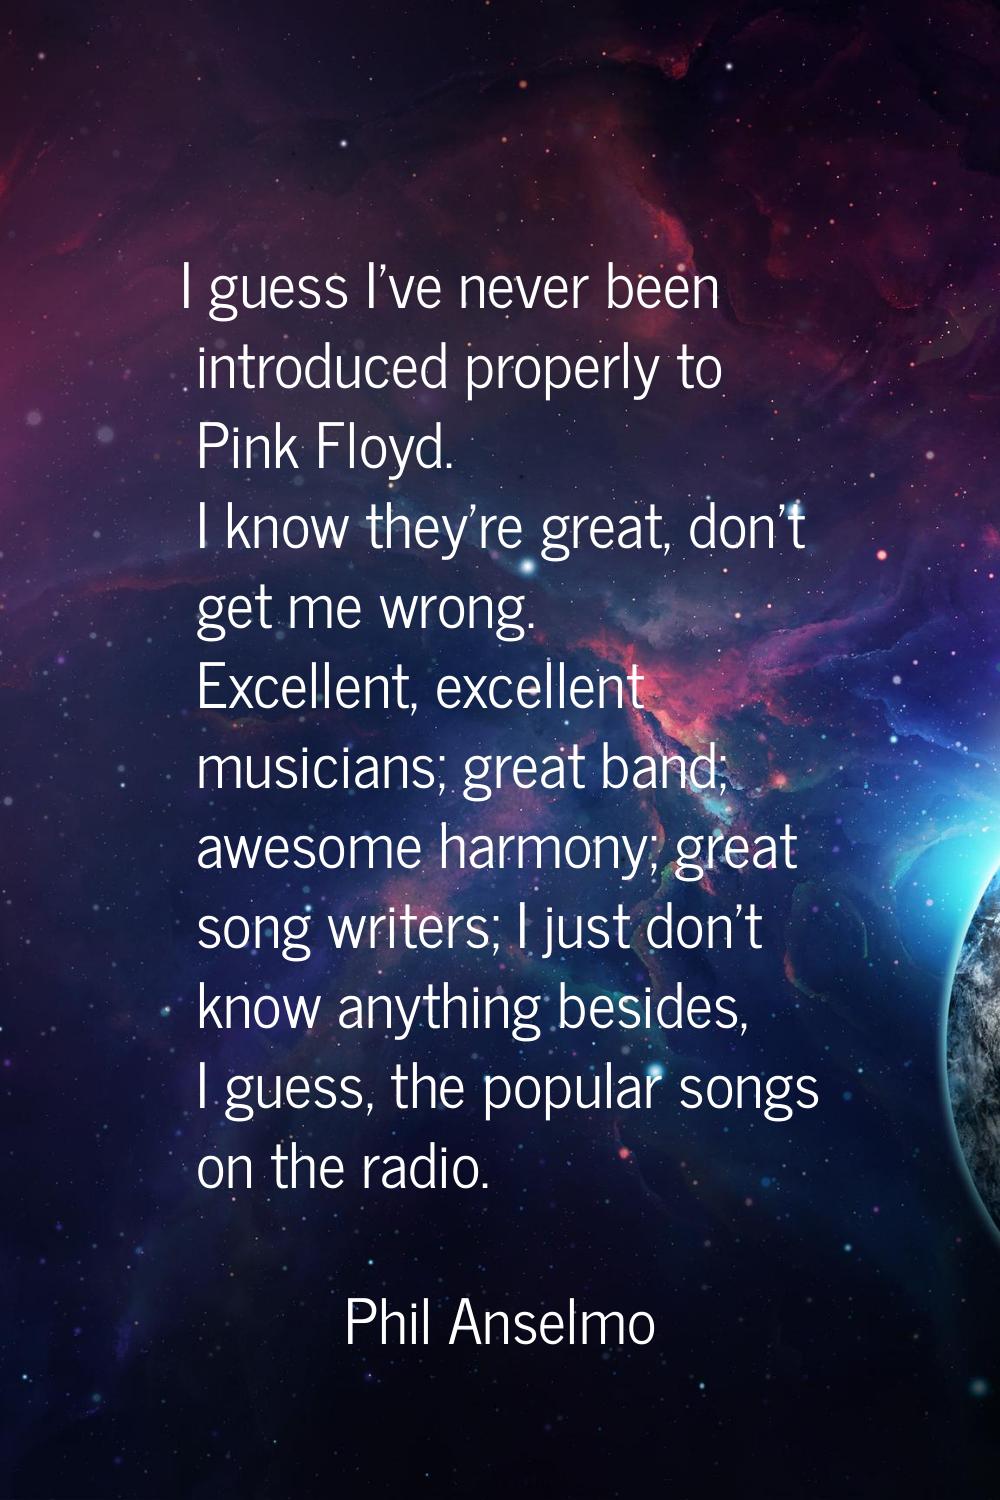 I guess I've never been introduced properly to Pink Floyd. I know they're great, don't get me wrong